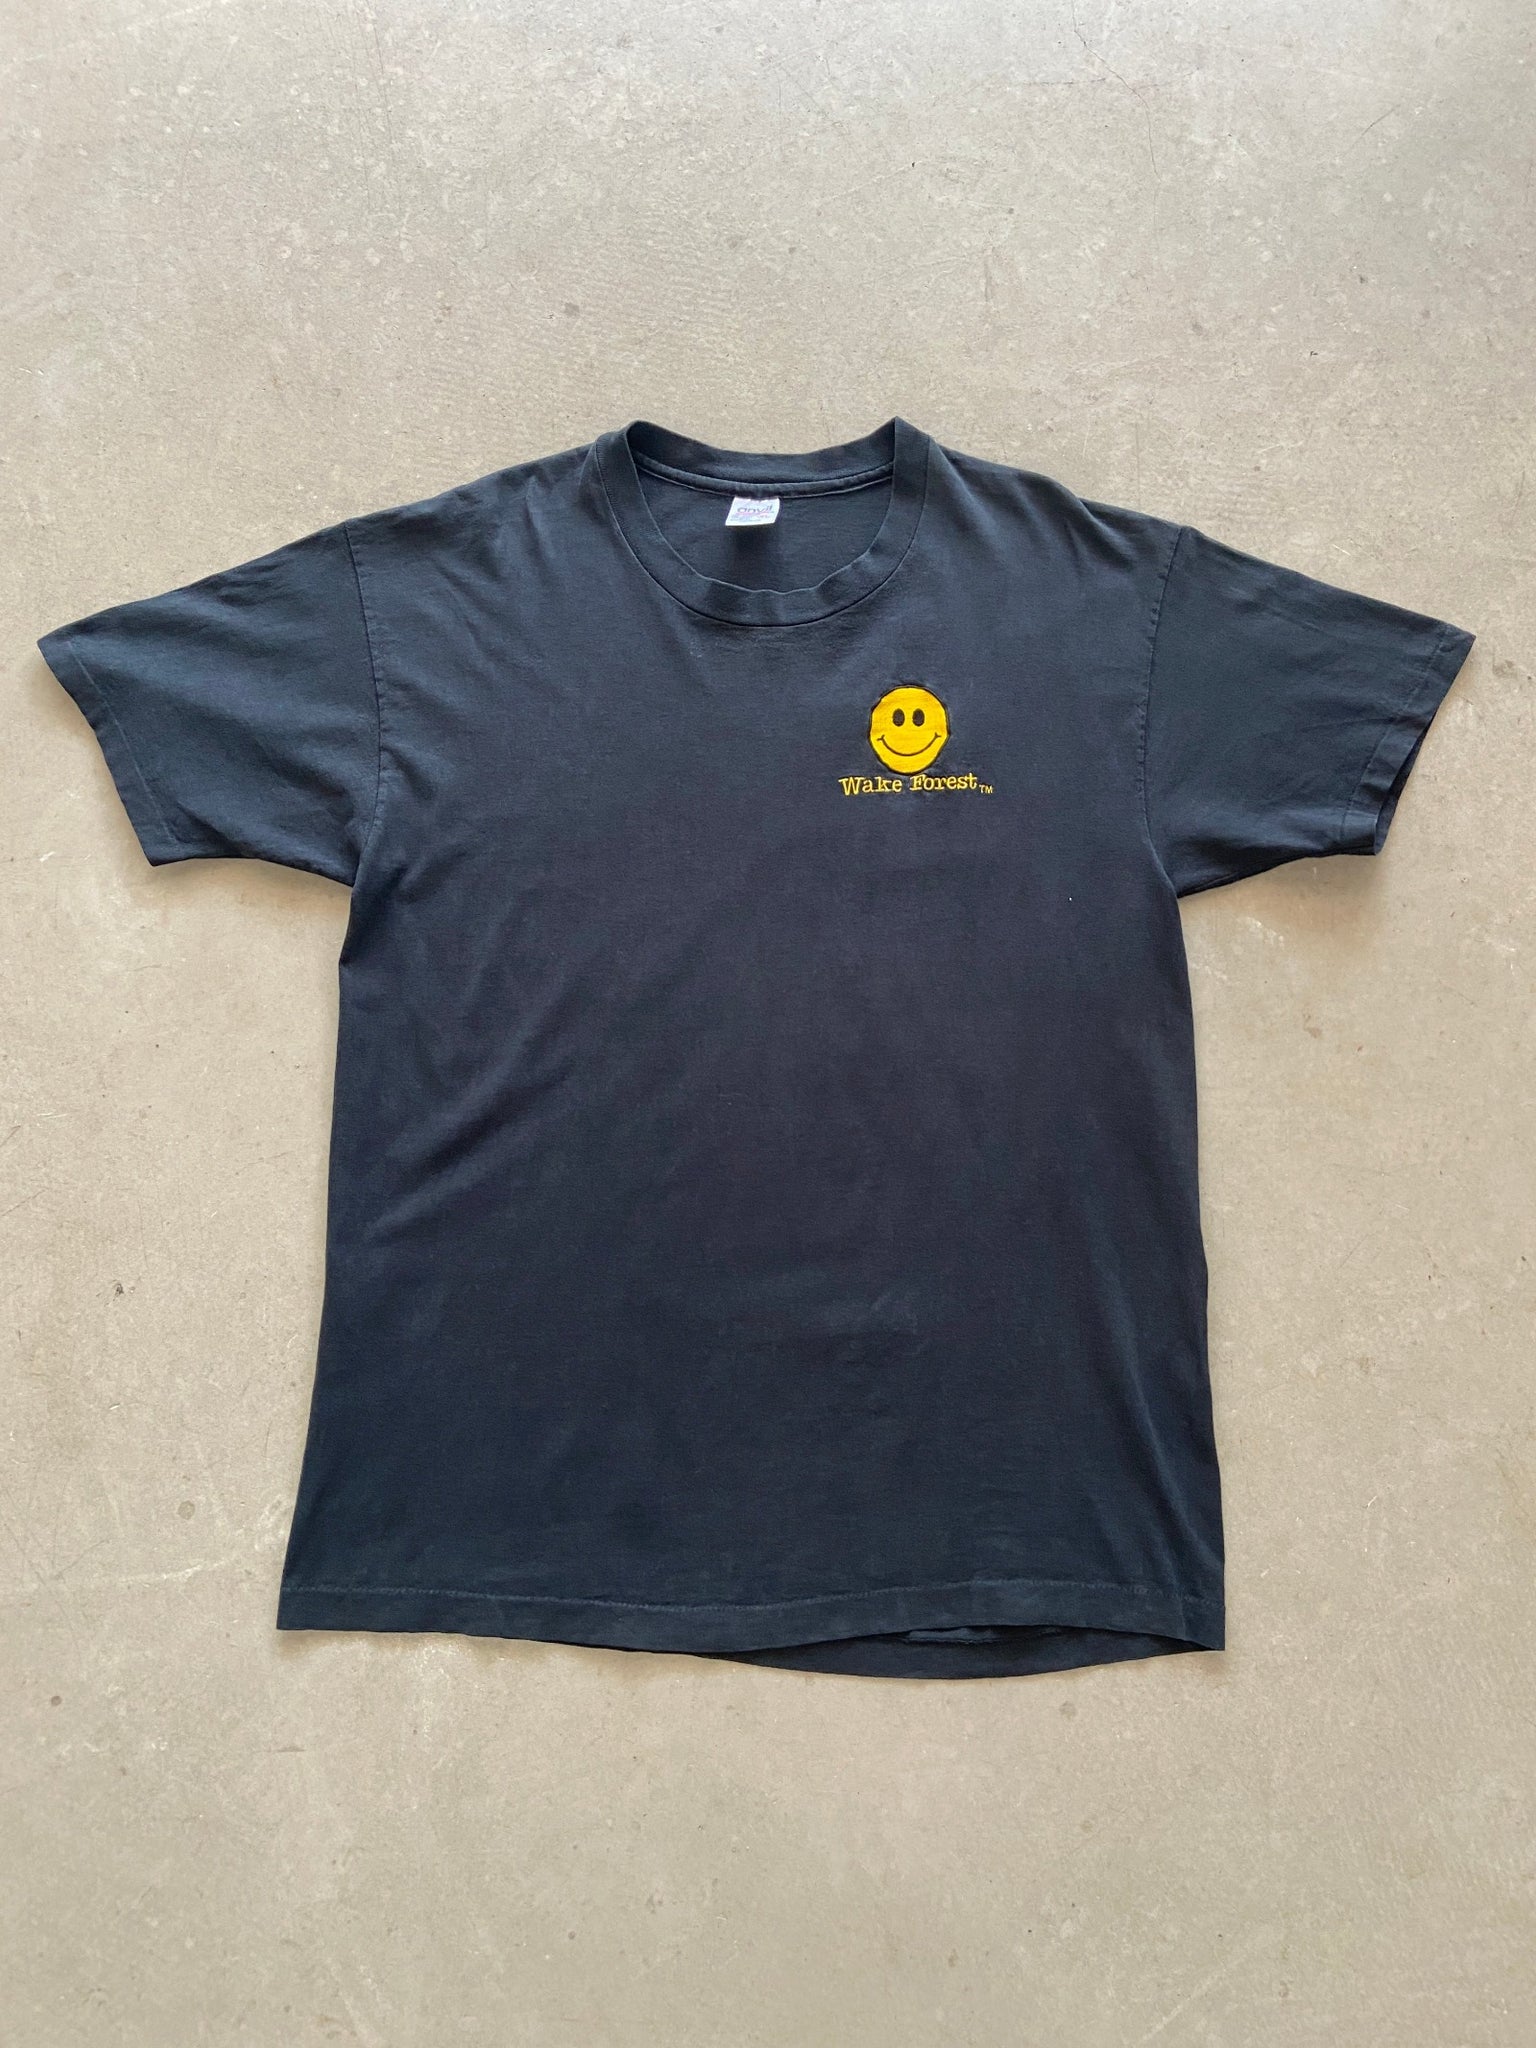 1990's Wake Forest Embroidered T-Shirt - XL